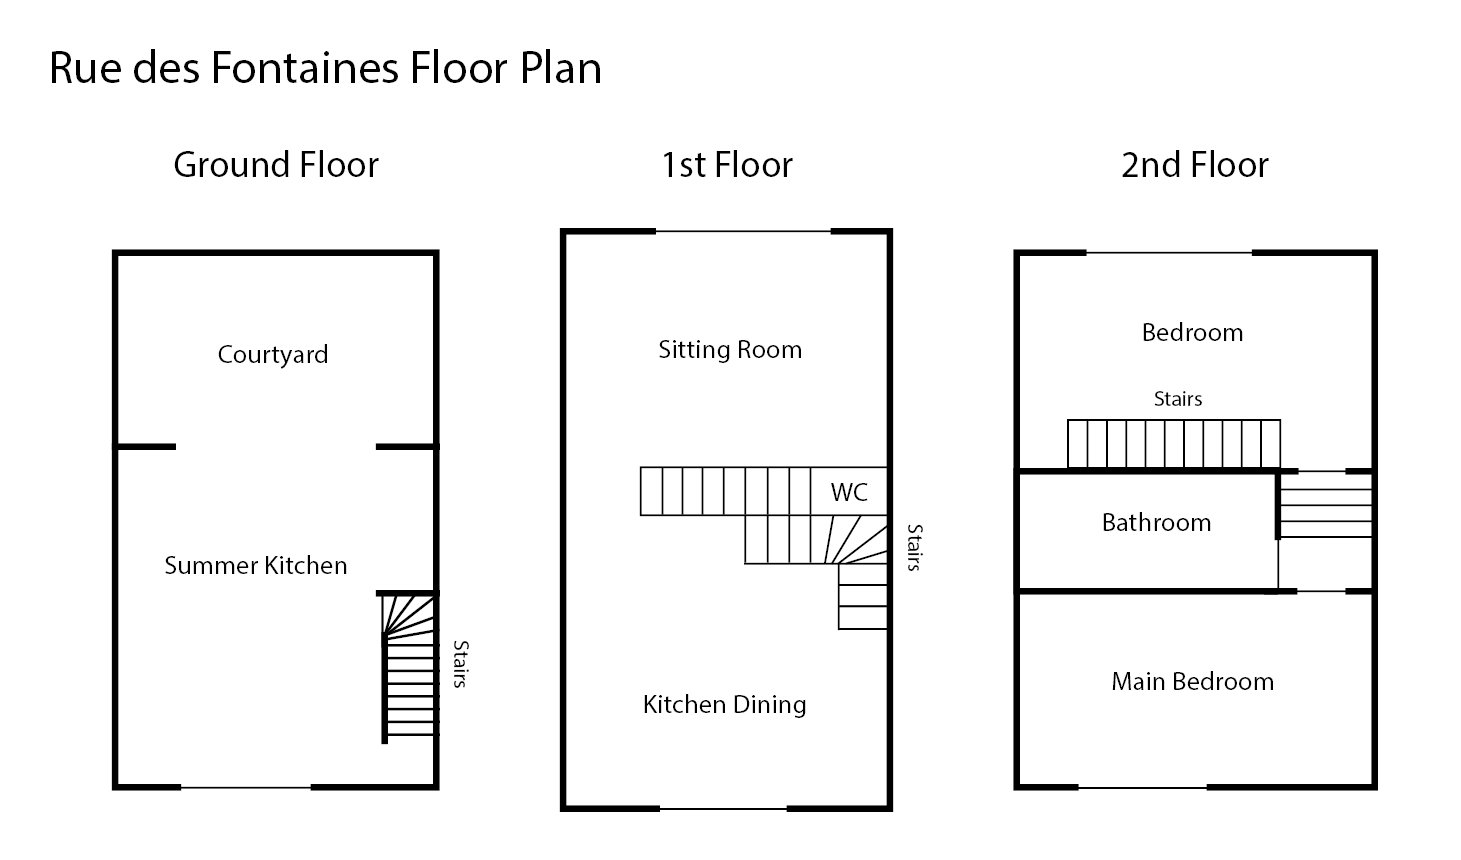 Click on Rue des Fontaines floor plan to view images